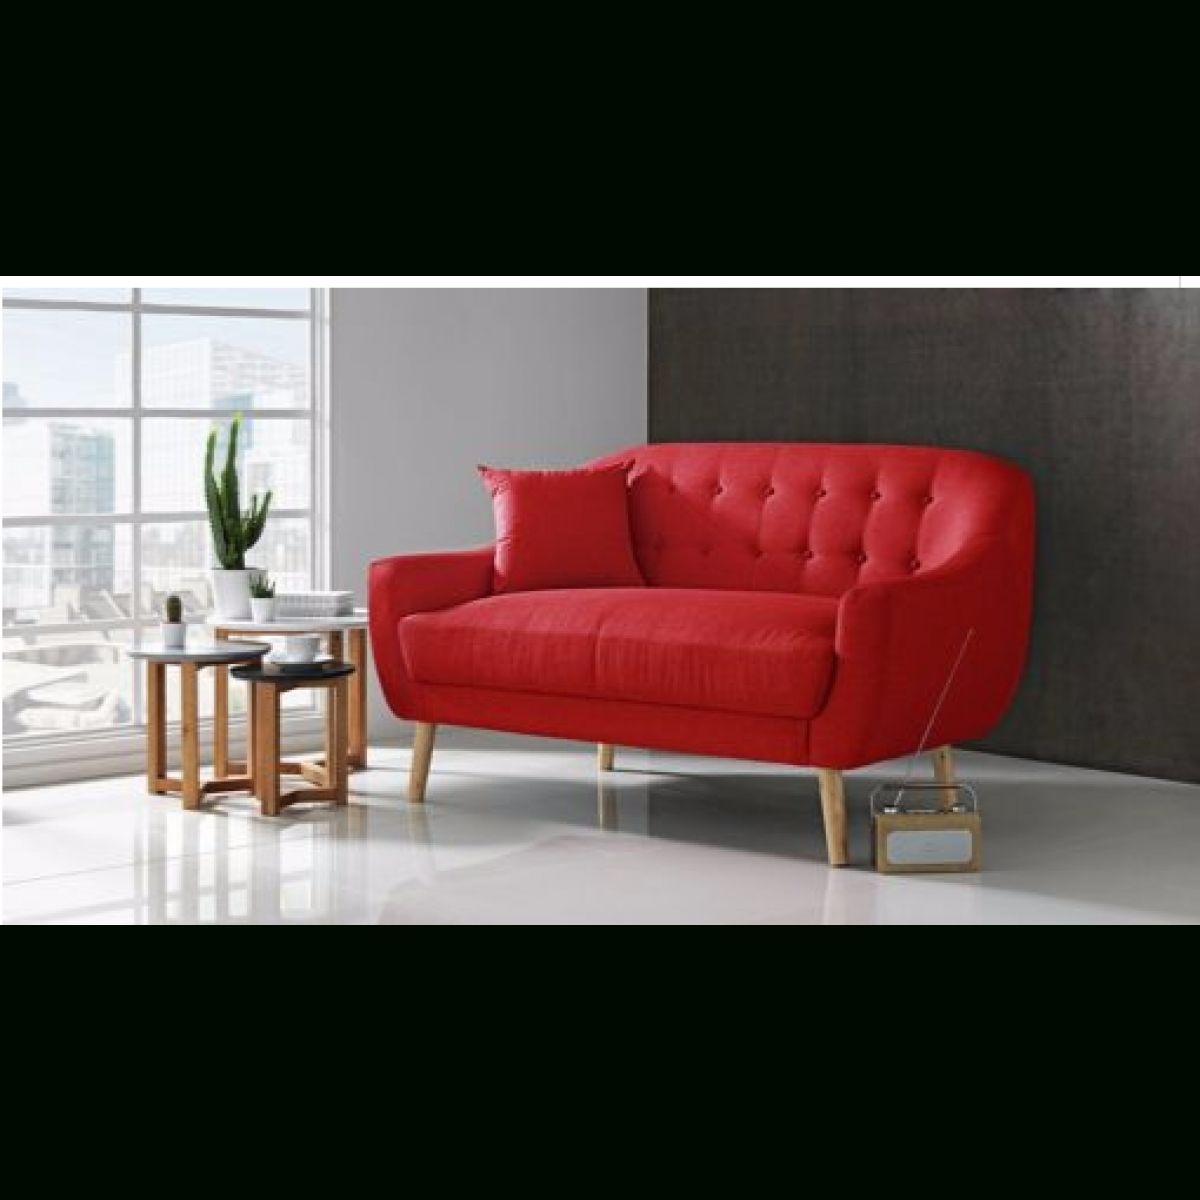 Hygena Lexie Retro Compact Fabric 2 Seater Sofa – Poppy Red Intended For Retro Sofas (View 4 of 10)